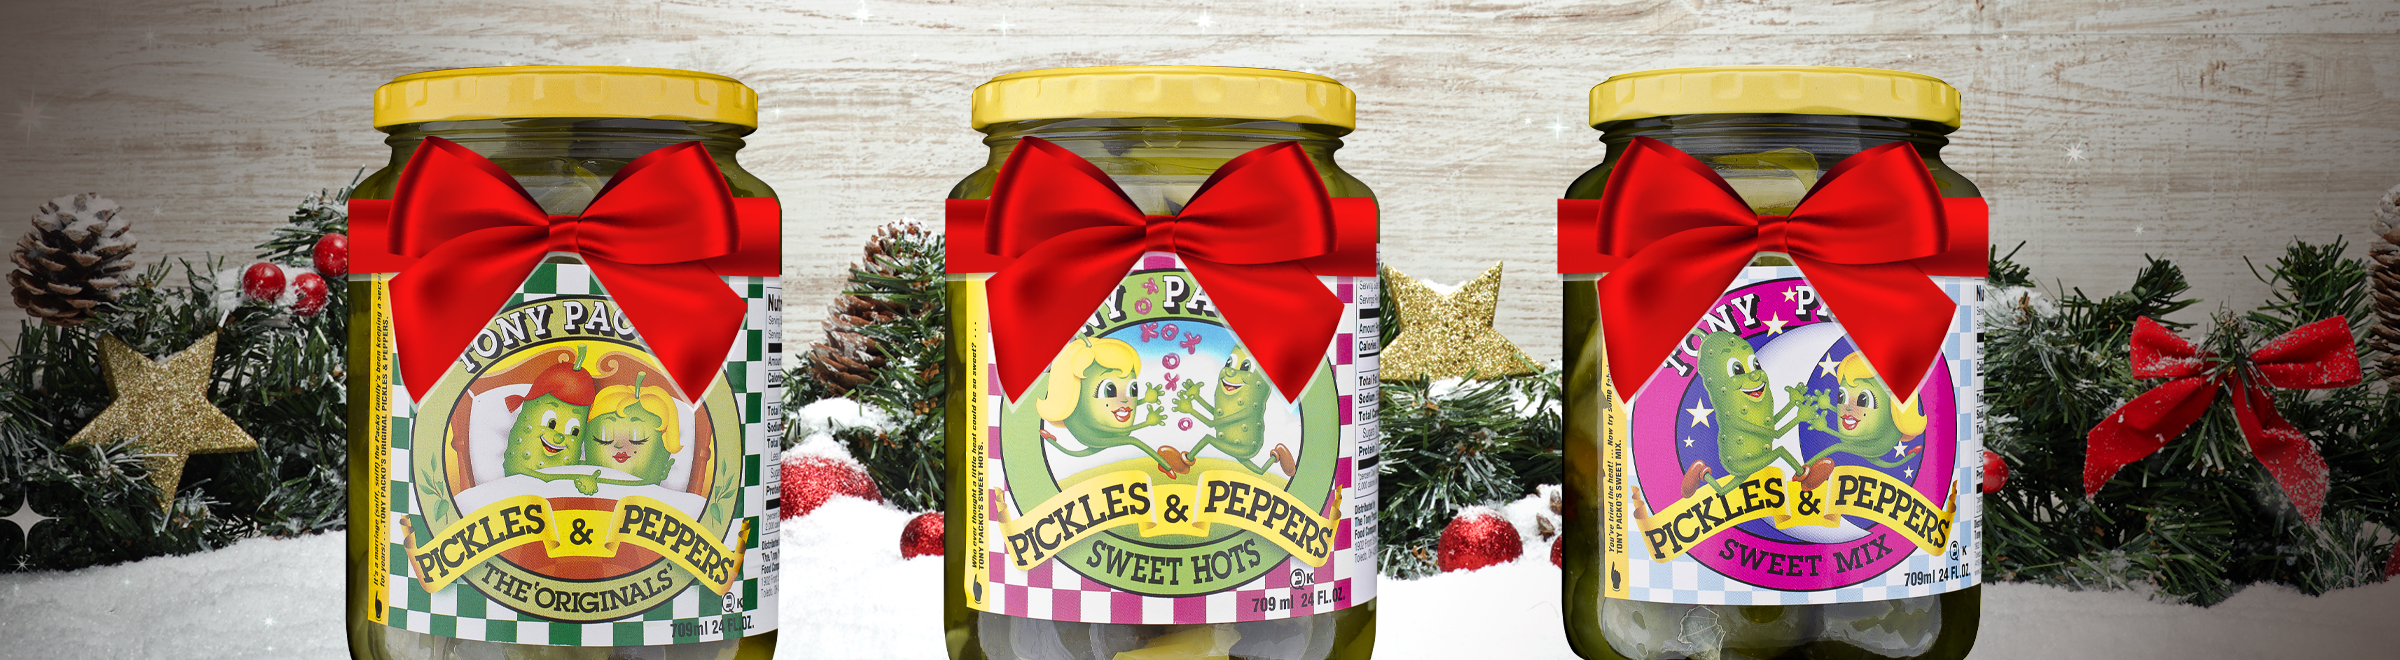 Holiday image of evergreen, holly and red bows with Packo's pickles jars and chili dog sauce in front.